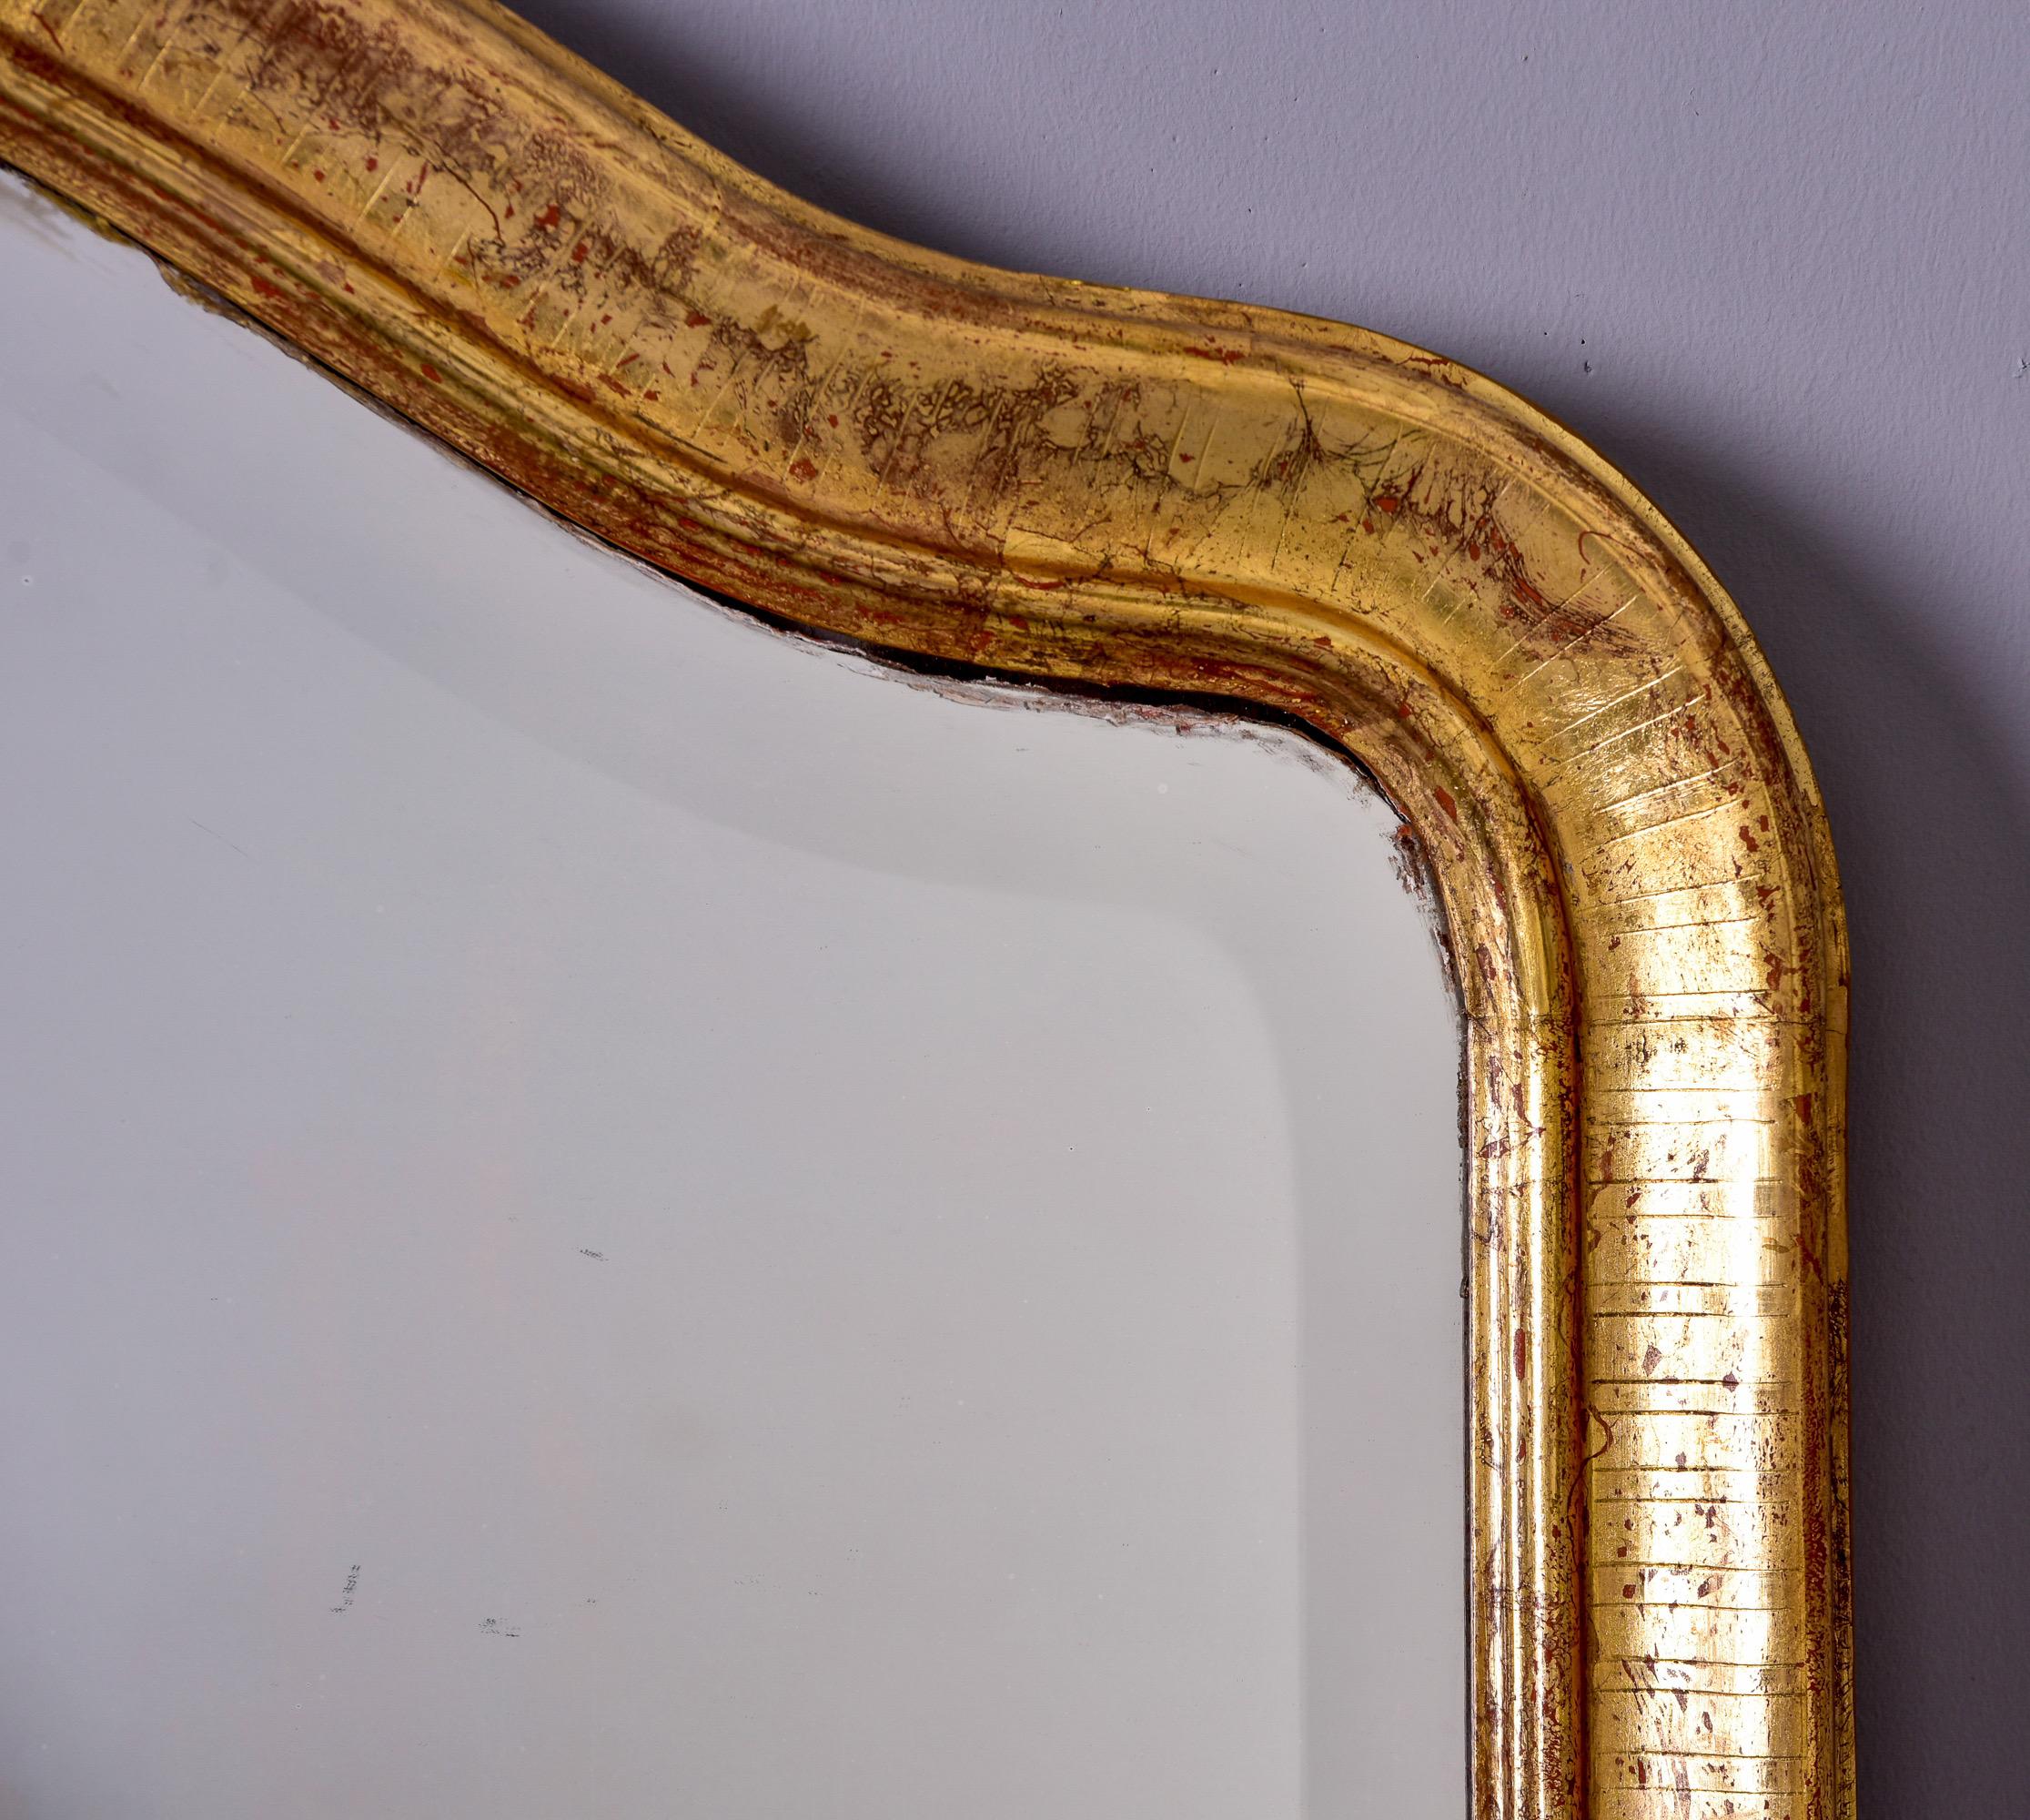 Circa late 19th century tall gilded Louis Philippe mirror with decorative crest and beveled edge. Unknown maker. 

Overall very good antique condition with some scattered surface wear to wood and mirror.